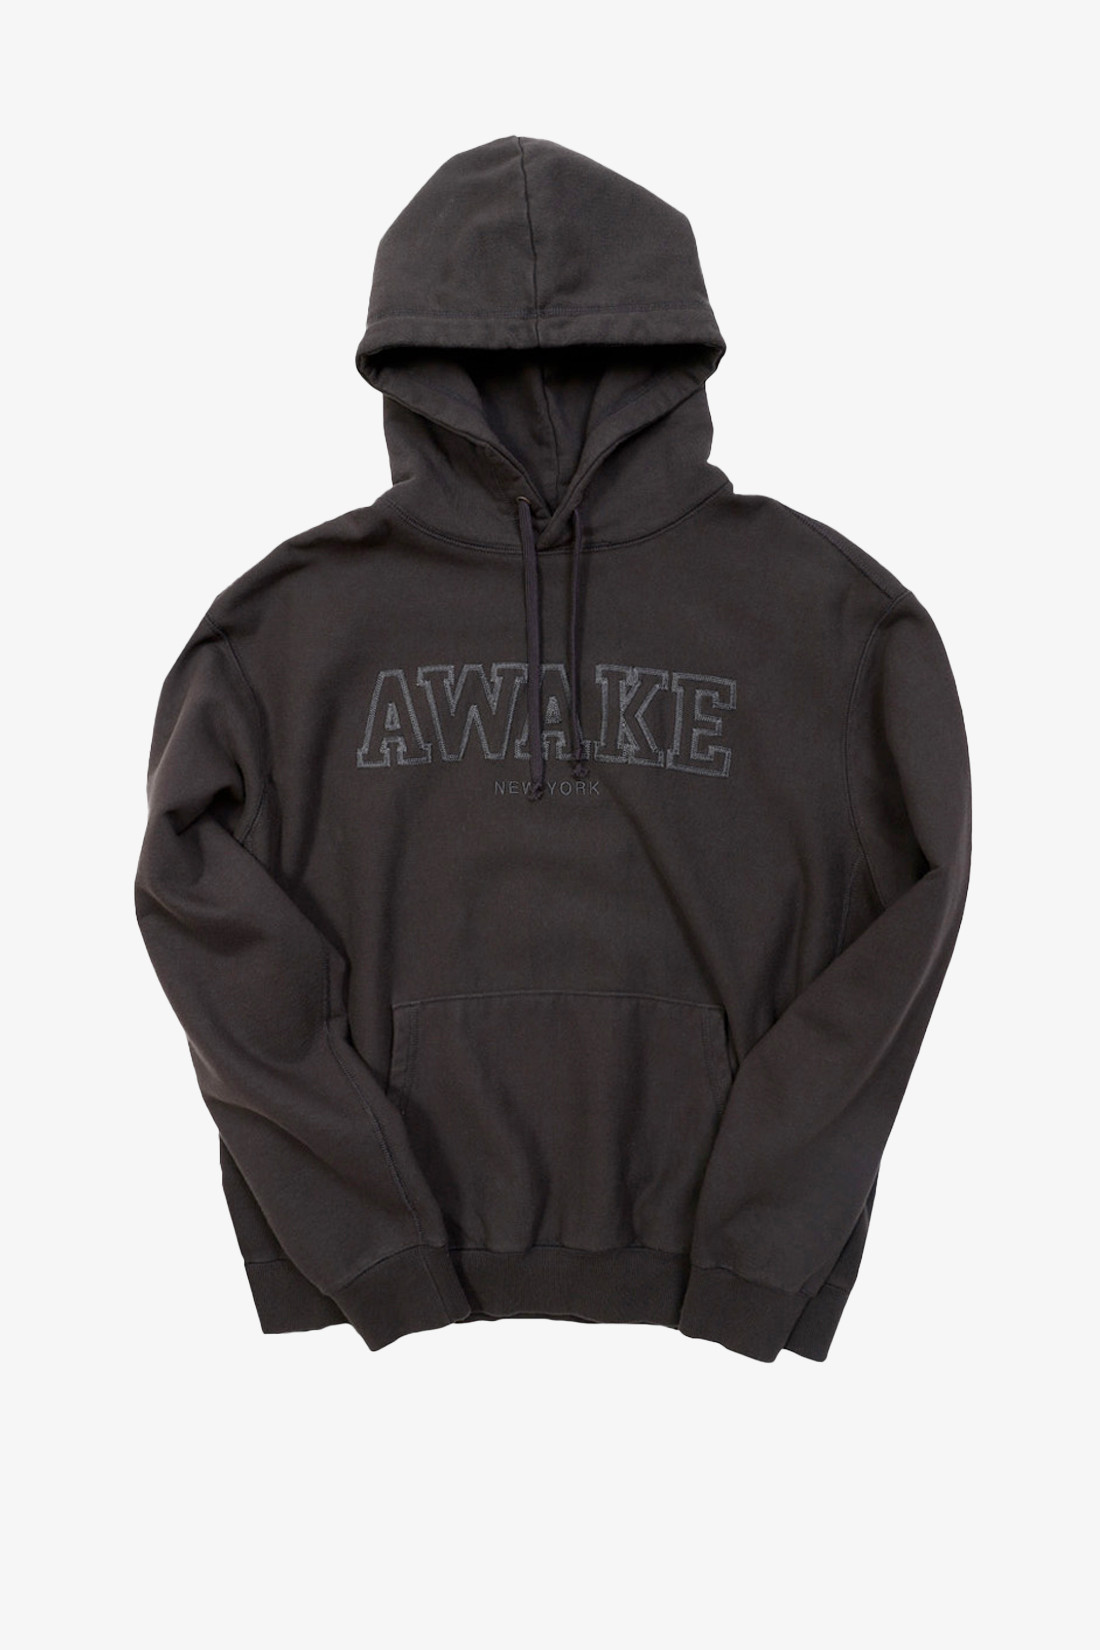 Military logo embroidered Hoodie charcoal